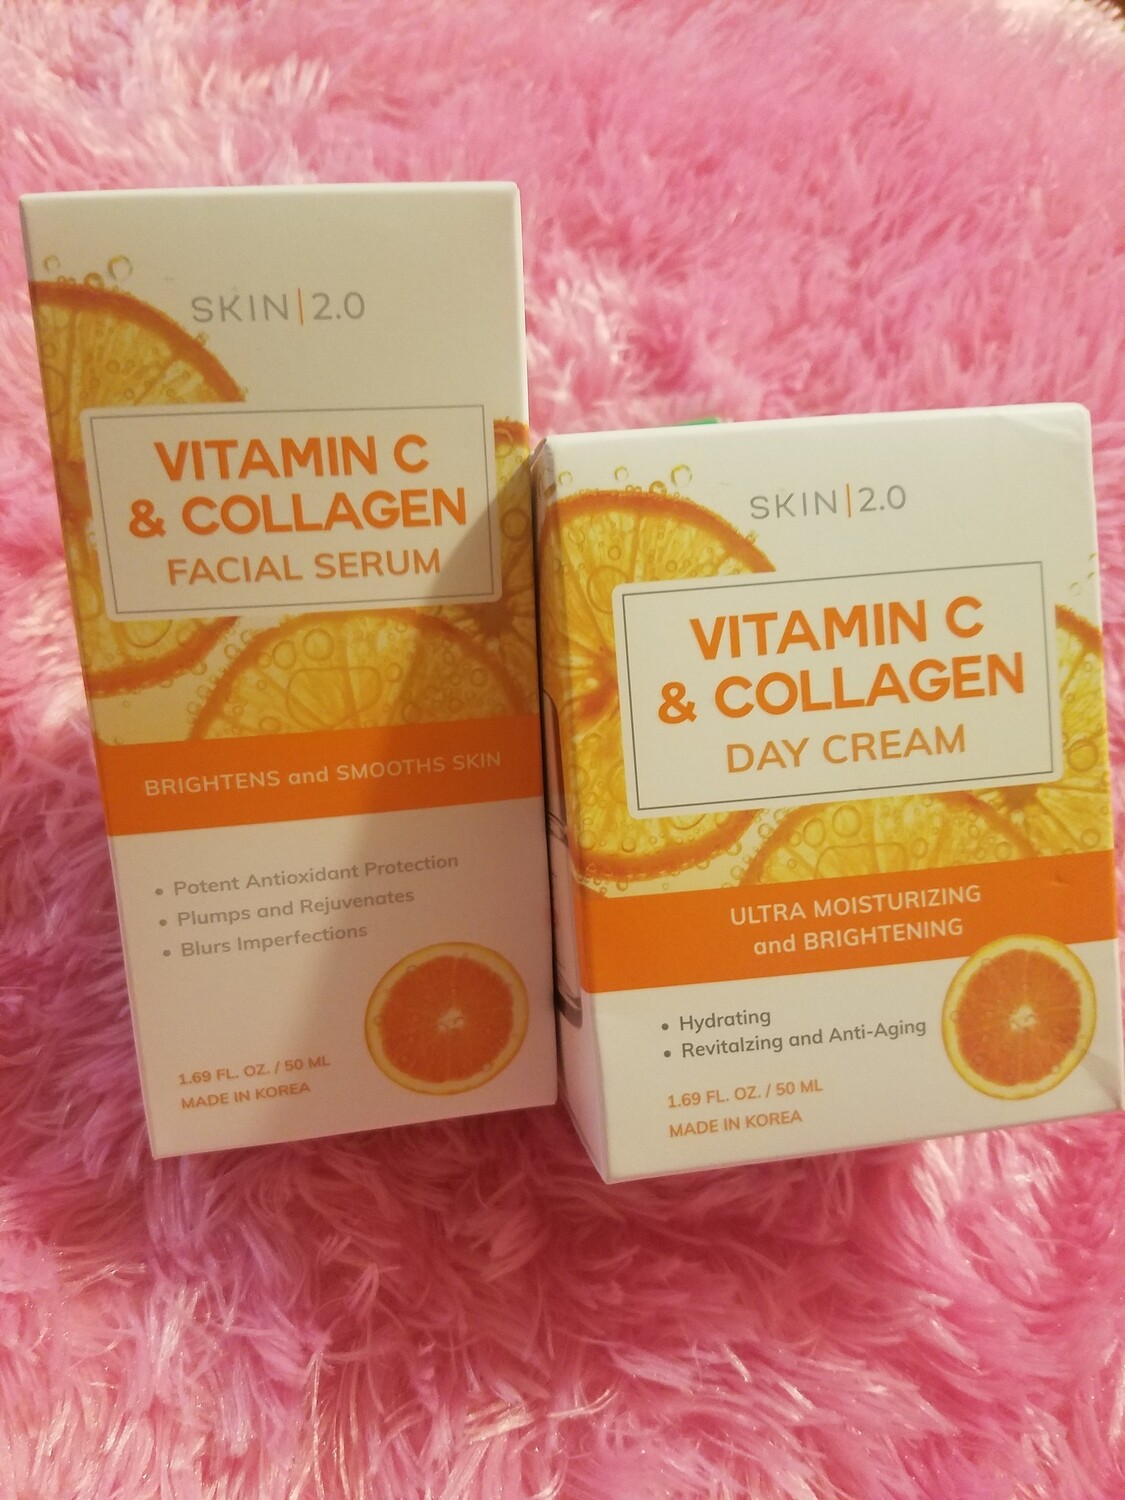 Skin 2.0 Vitamin C  & Collagen Facial Serum and Cream Boosts Hydration for Younger, Firmer